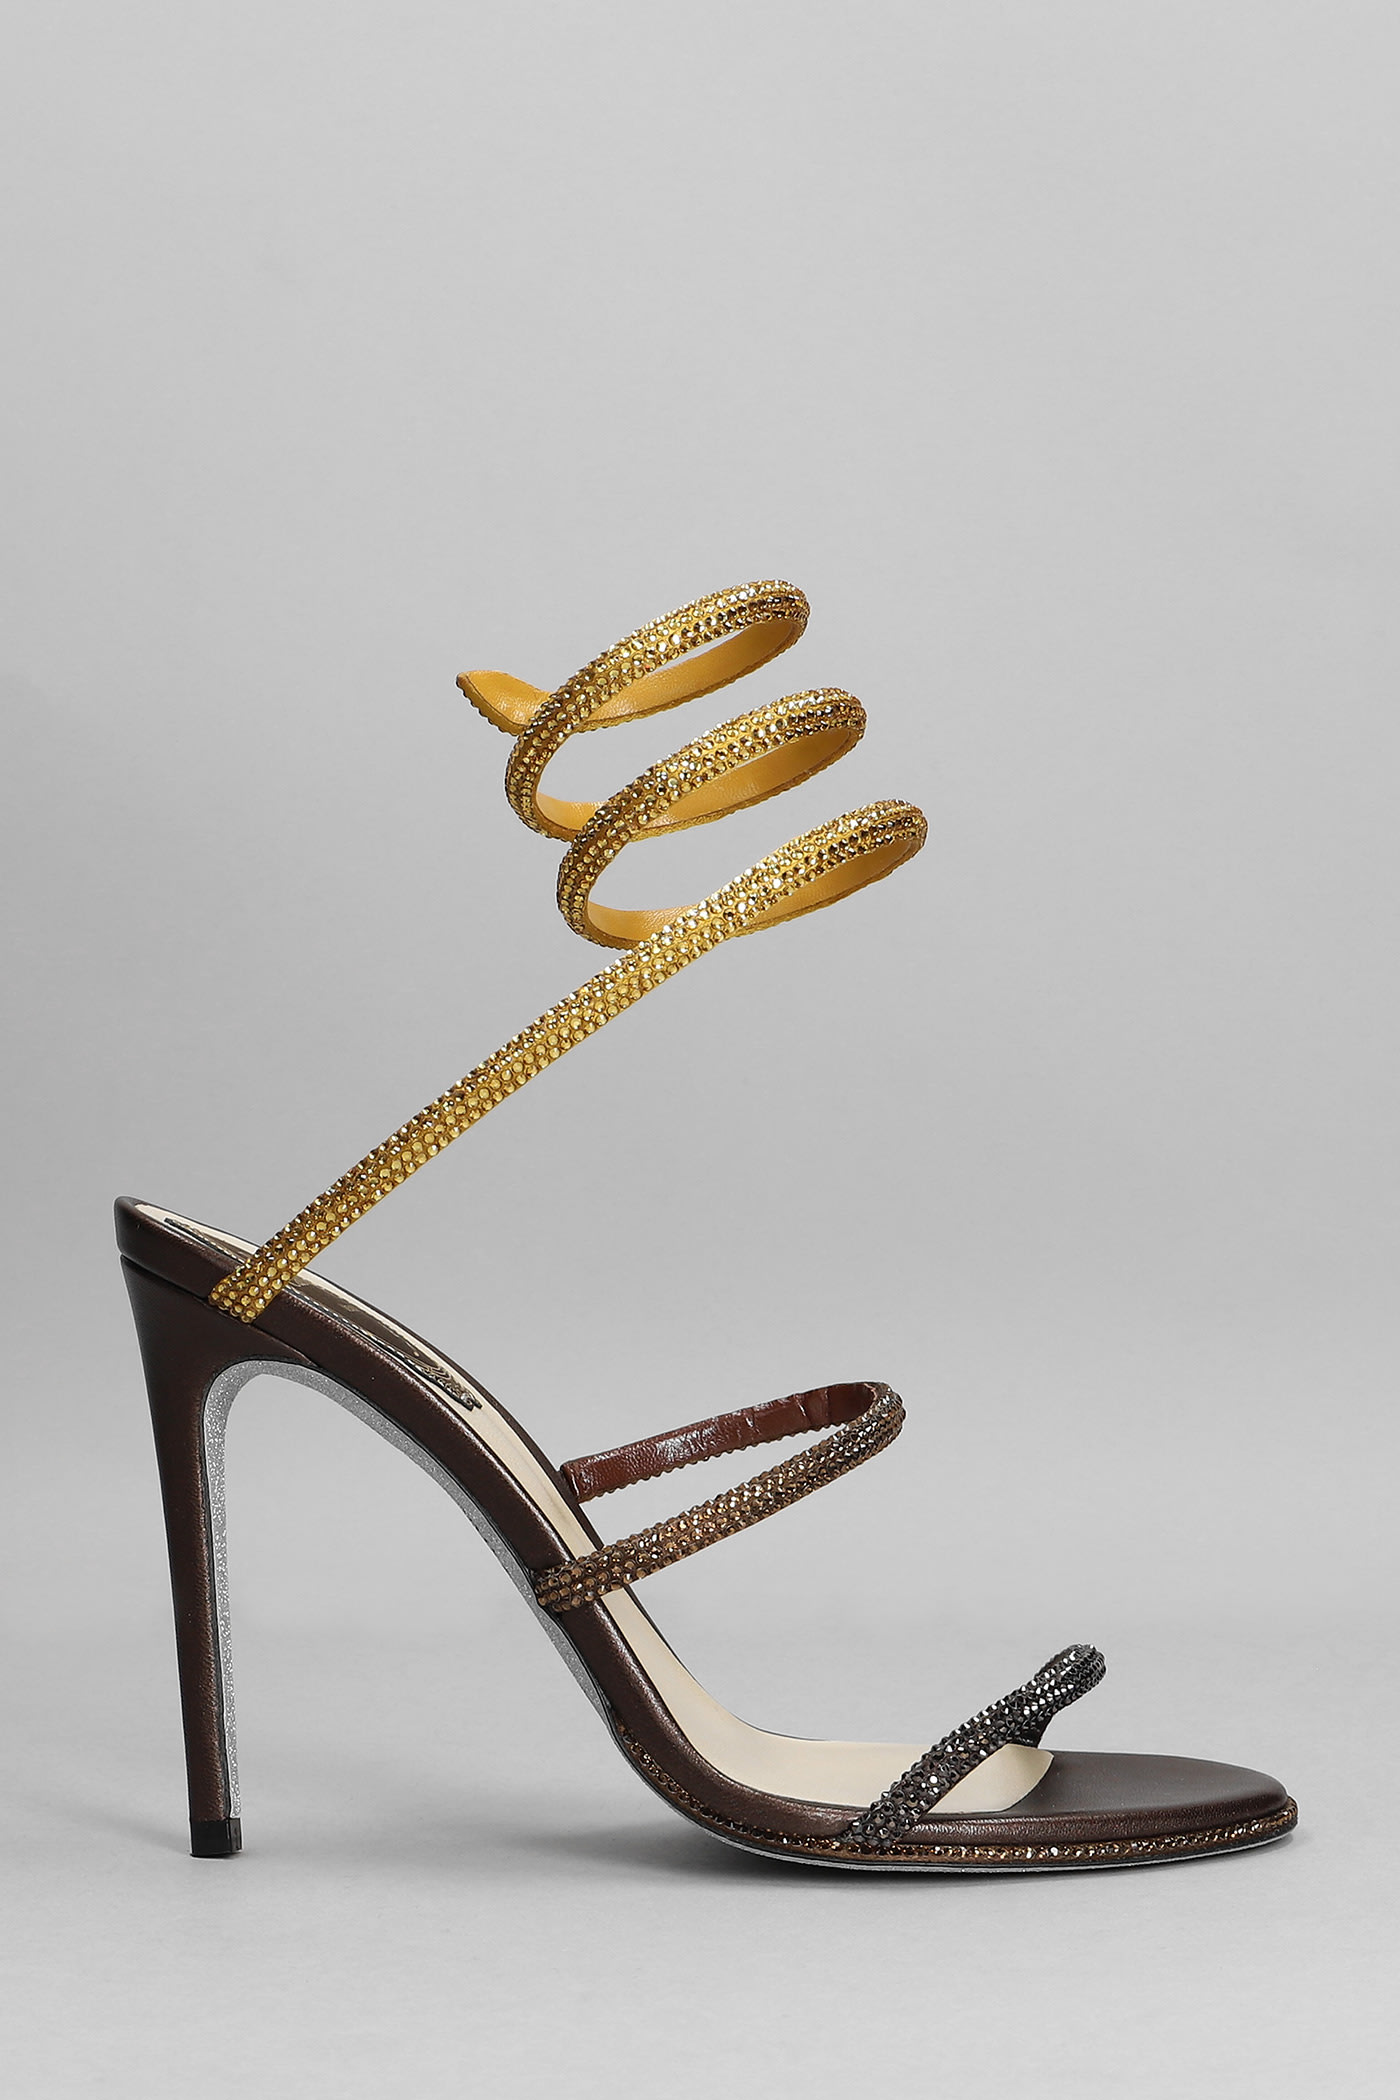 René Caovilla Cleo Sandals In Brown Leather | ModeSens